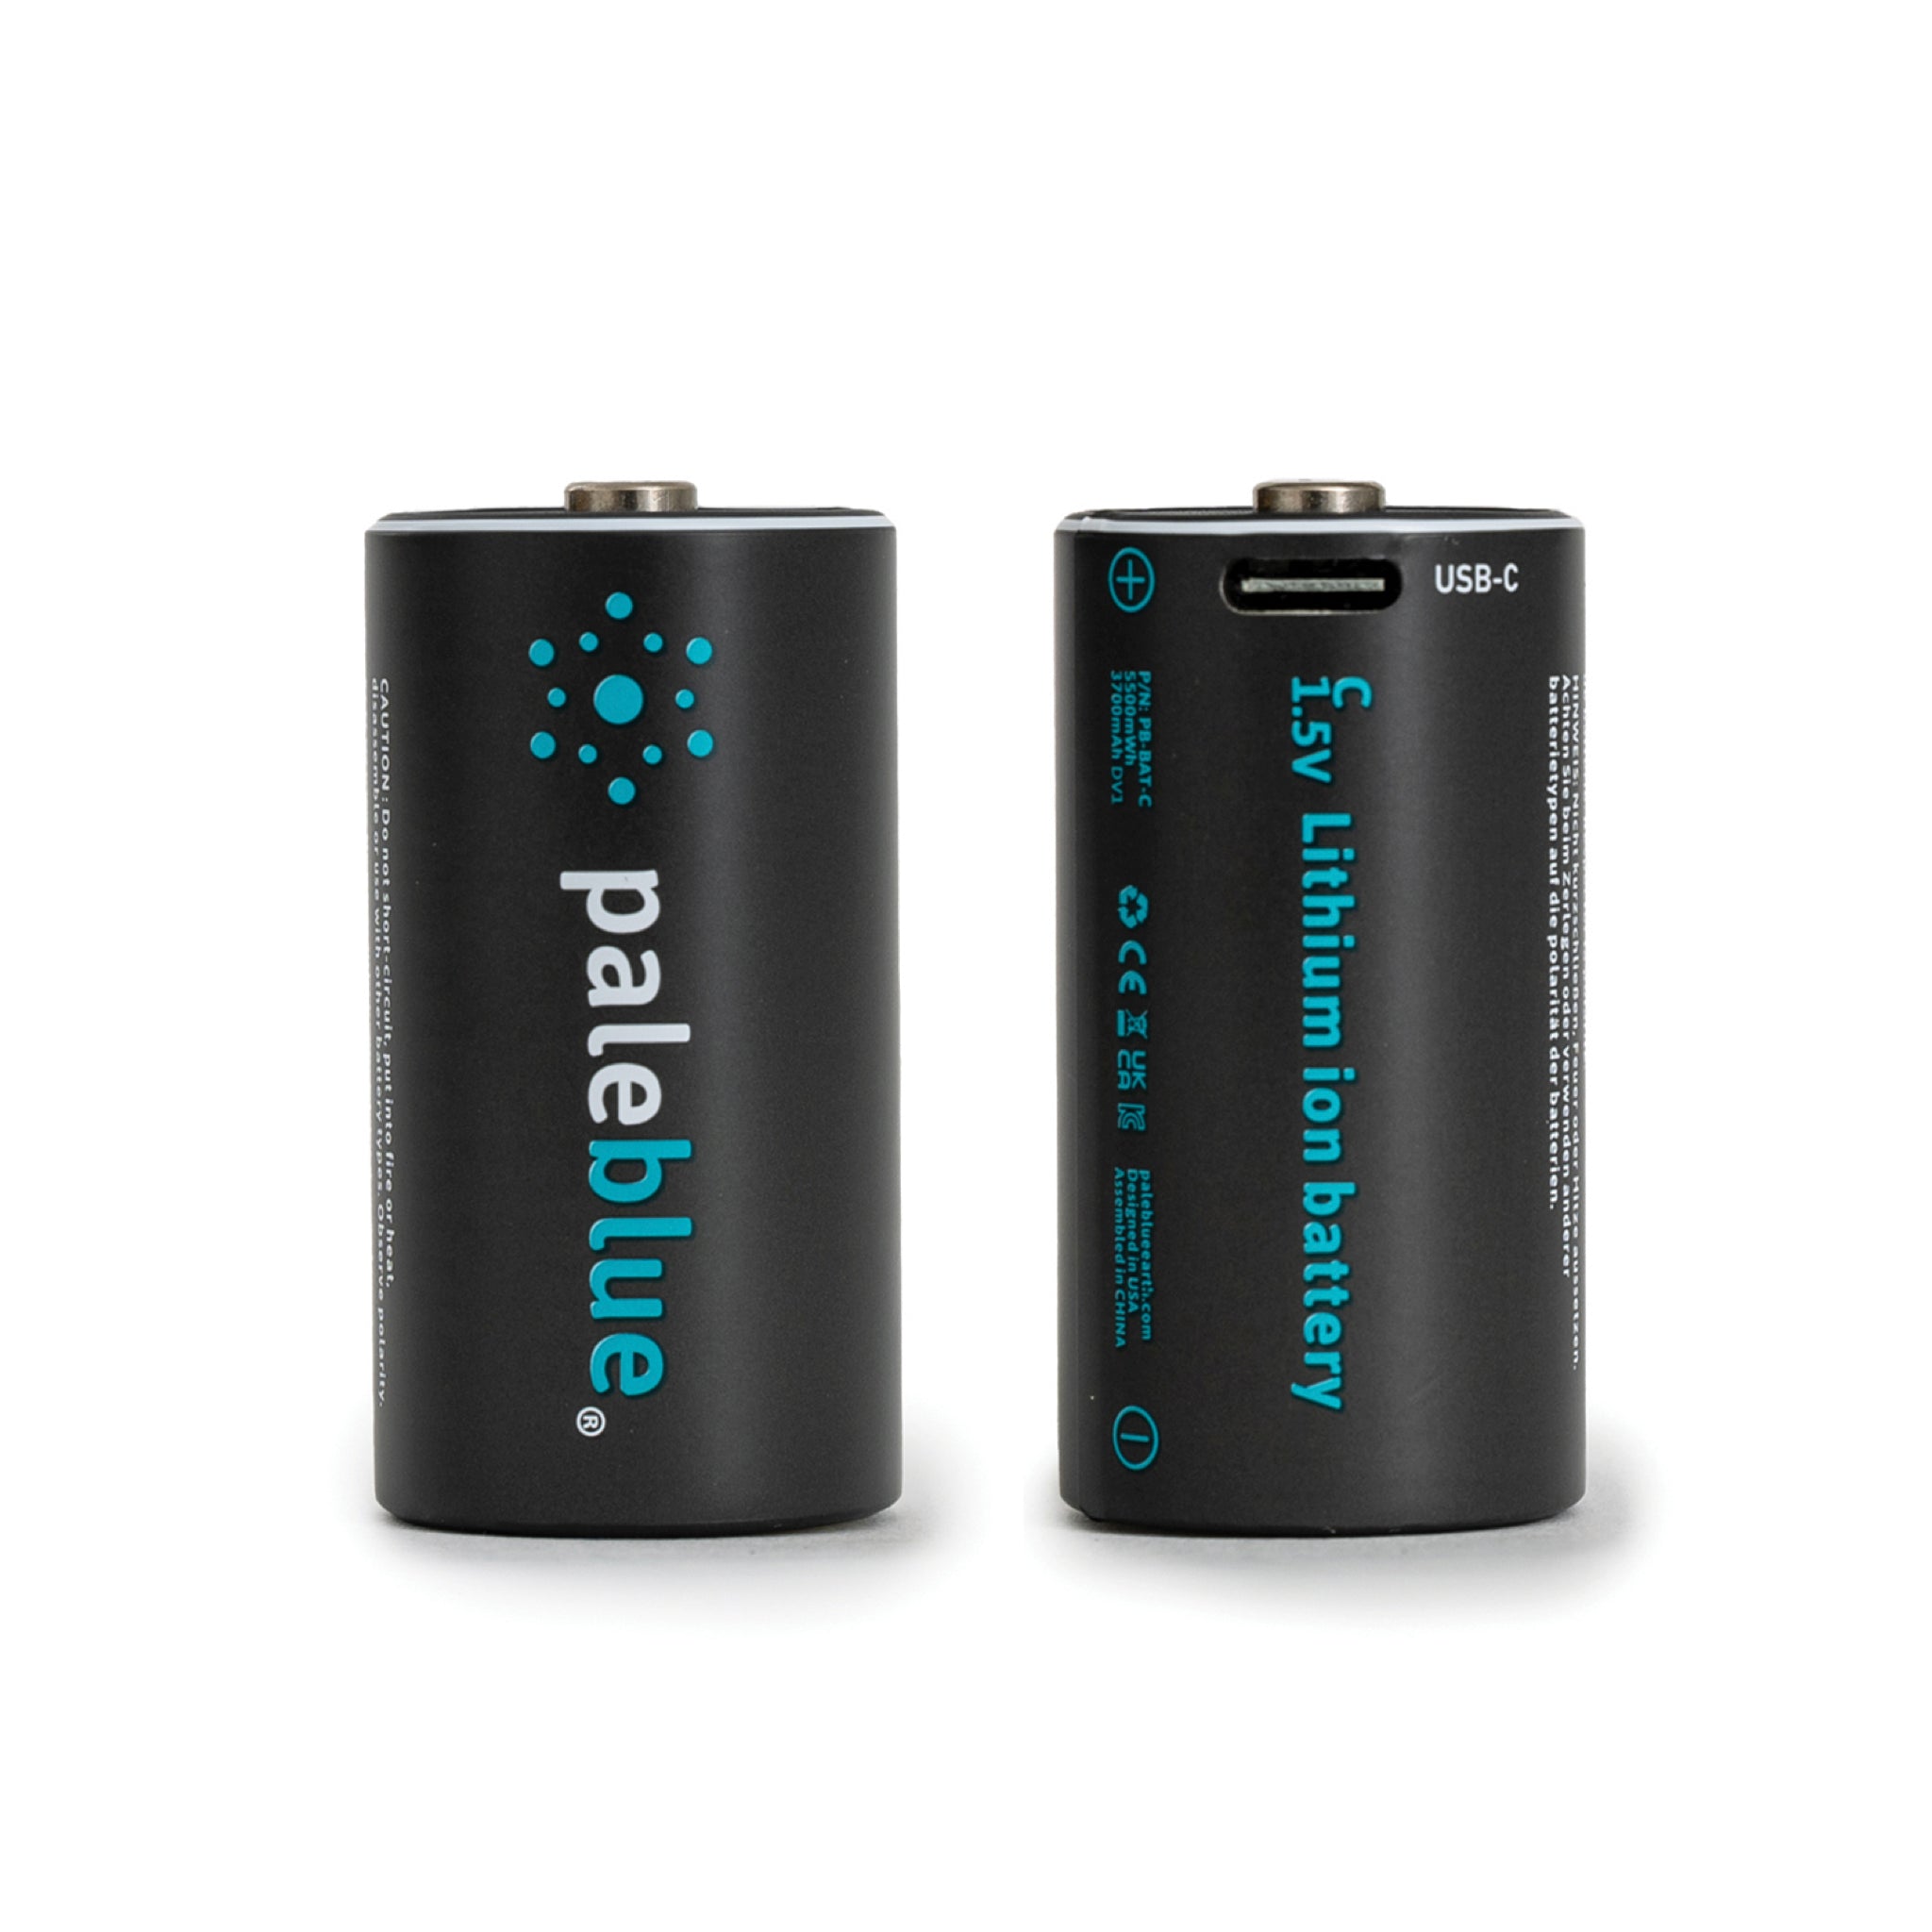 C Cell USB Rechargeable Batteries